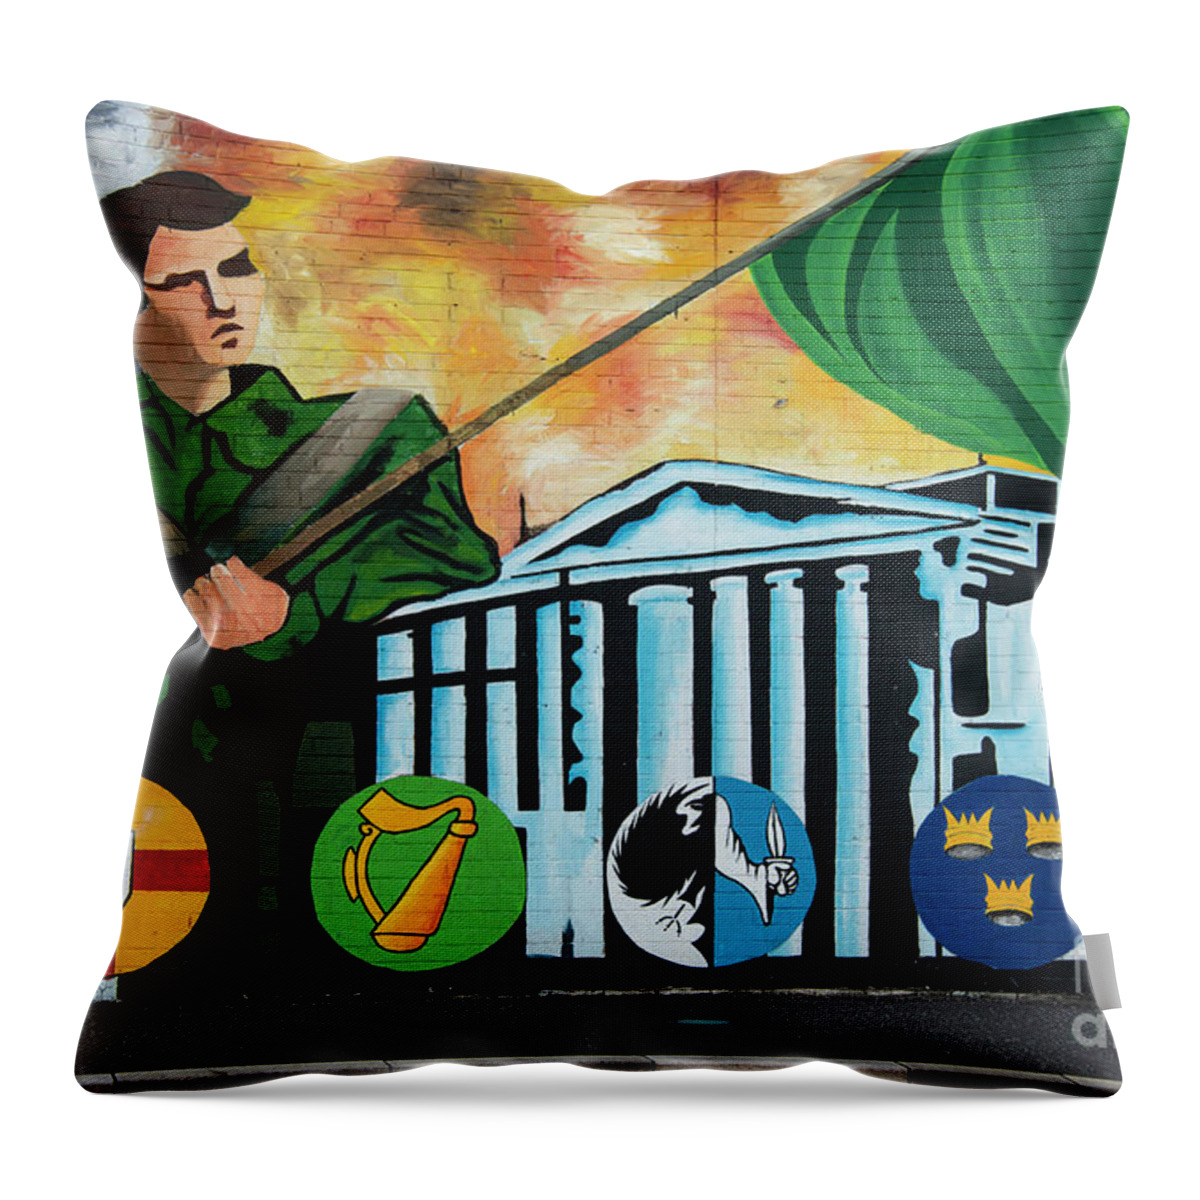 Belfast Throw Pillow featuring the photograph Raising the Flag Mural by Bob Phillips